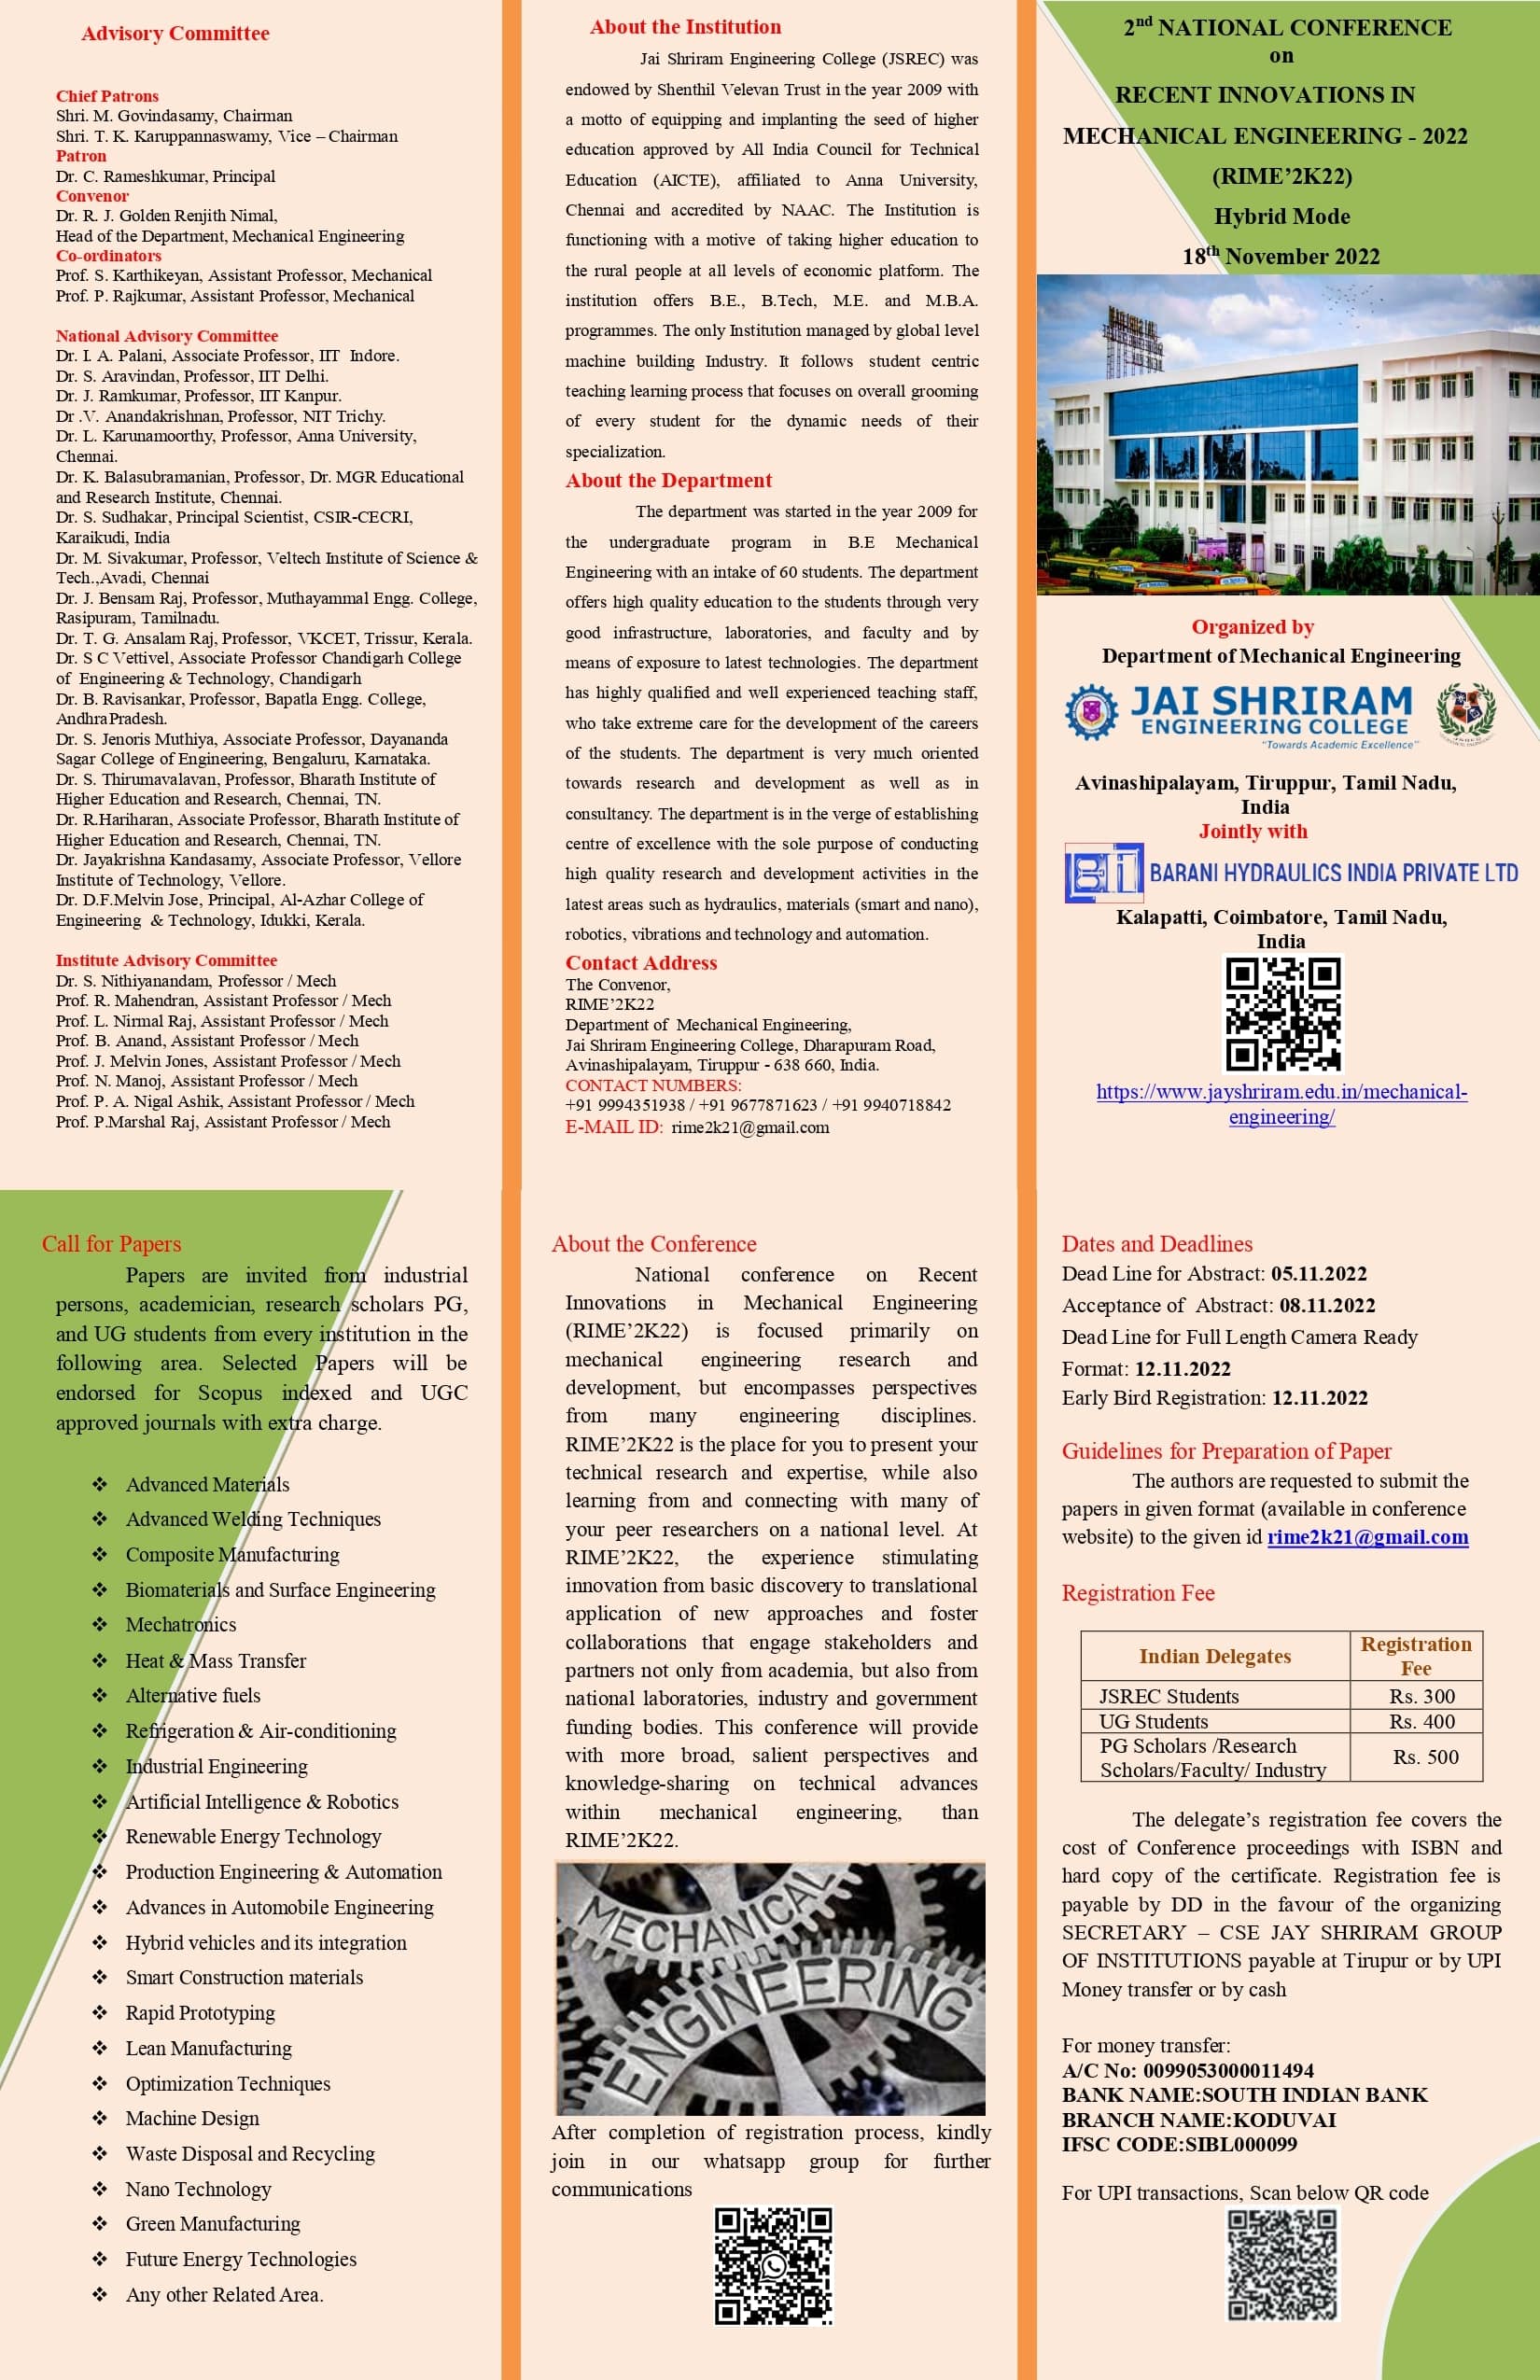 2nd National Conference on Recent innovations in Mechanical Engineering (RIME’2K22)